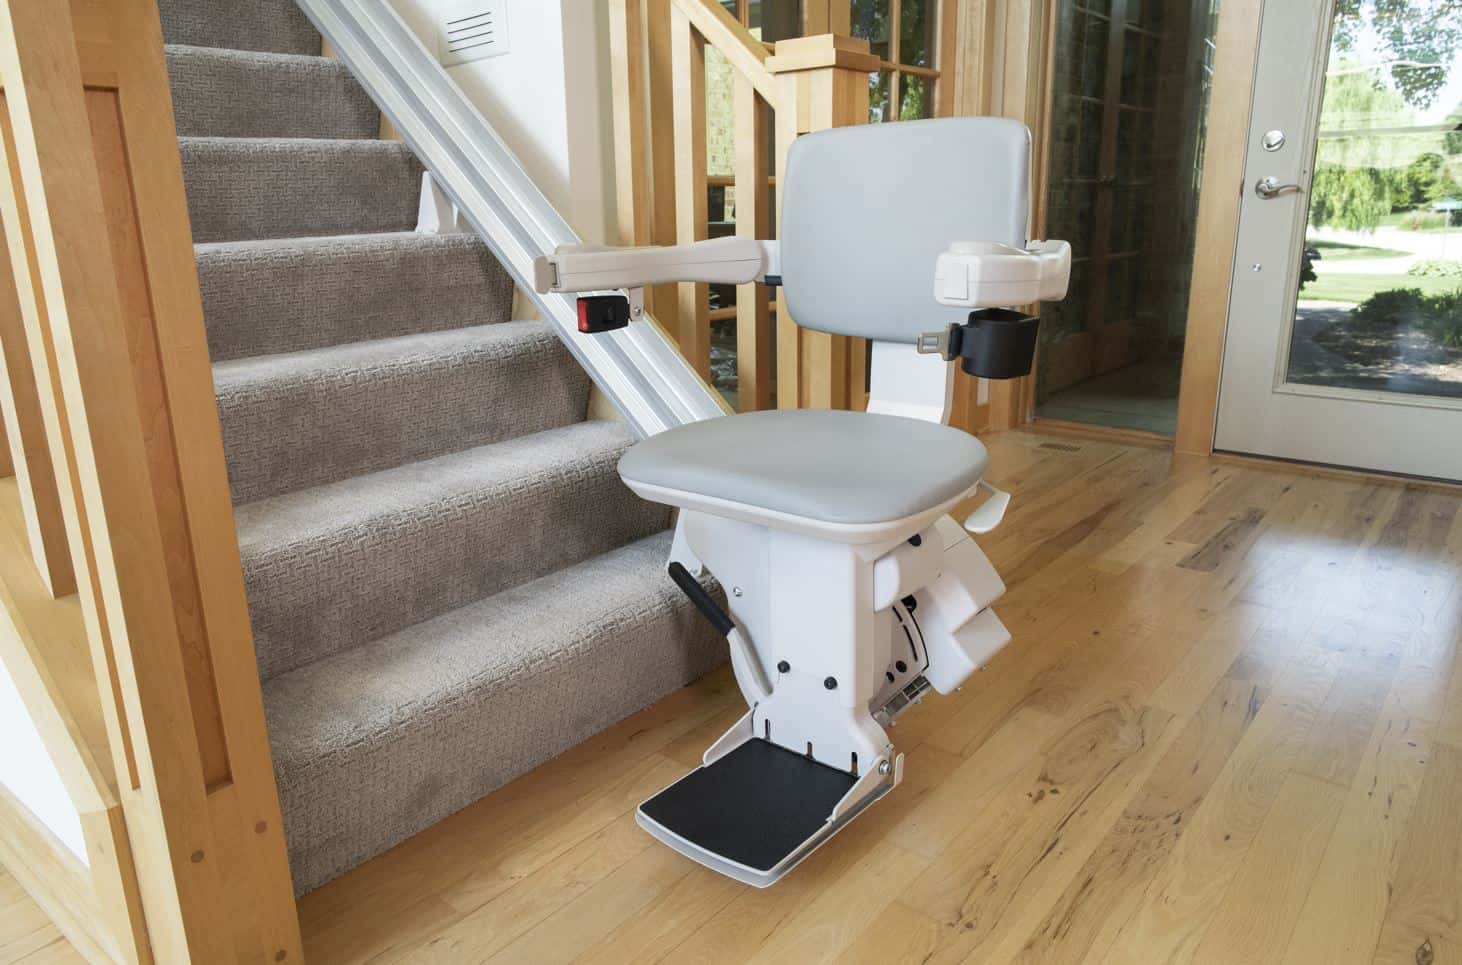 Bruno Stairlift available for test ride in Lifeway Mobility Los Angeles showroom